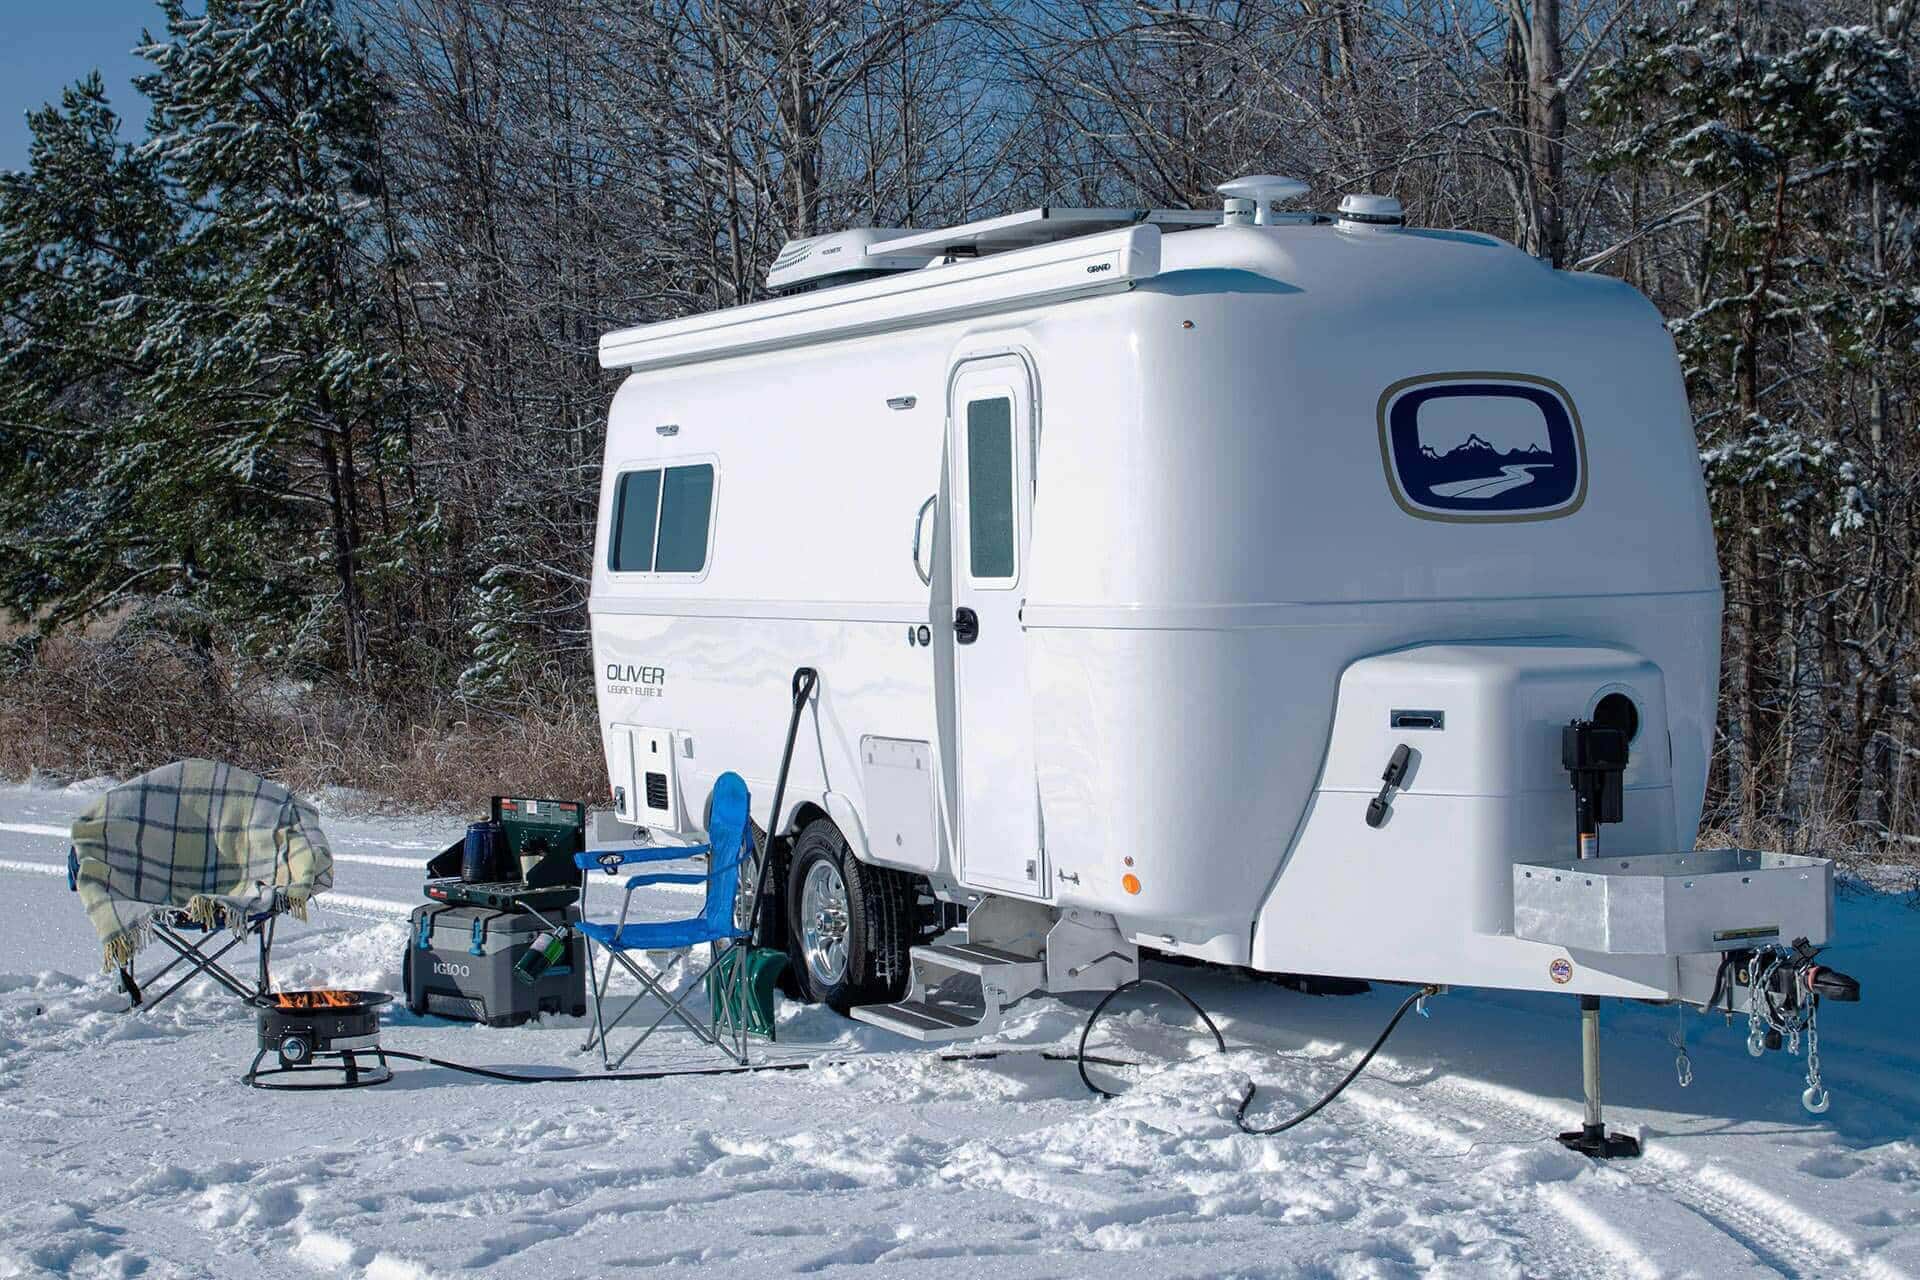 Oliver's Insulated Camper in the Snows